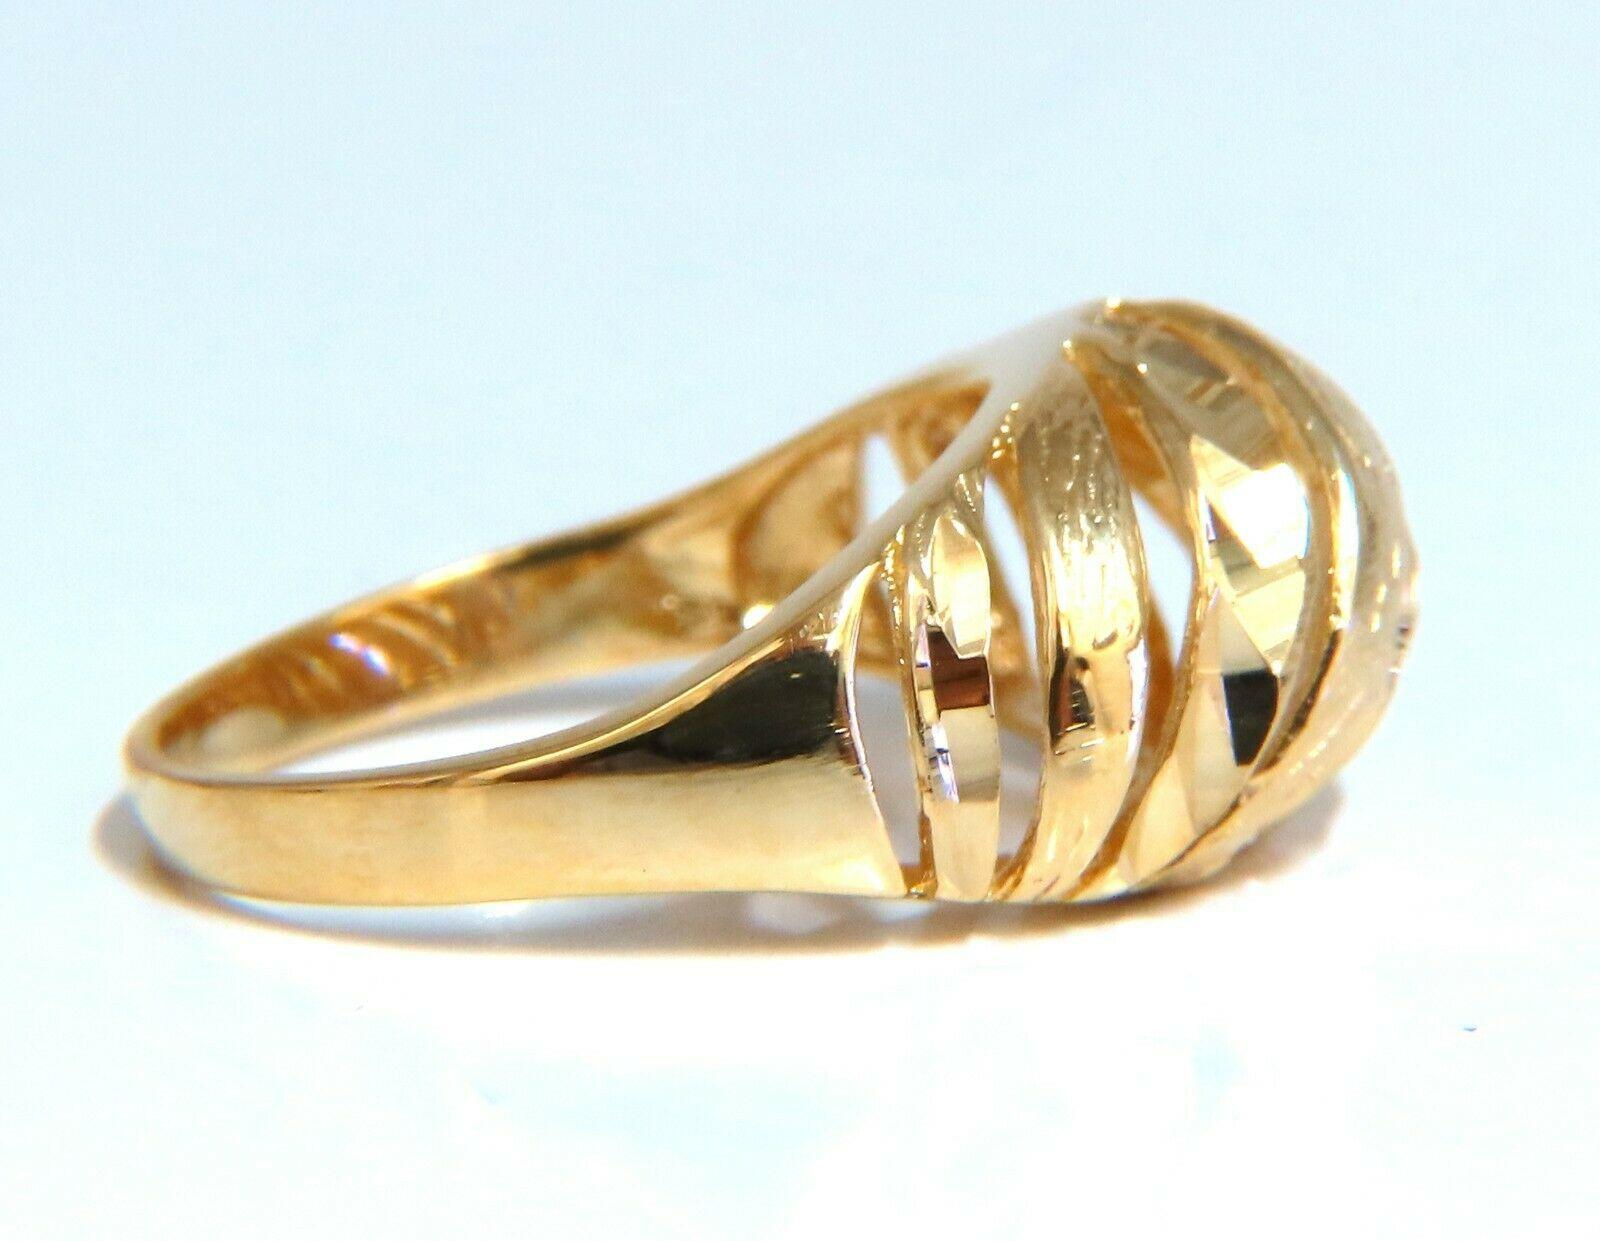 Staggered Row, Dome Ring

11.4mm wide

Depth: 8.2mm

14 karat yellow gold.

4.9 Grams

Size 9